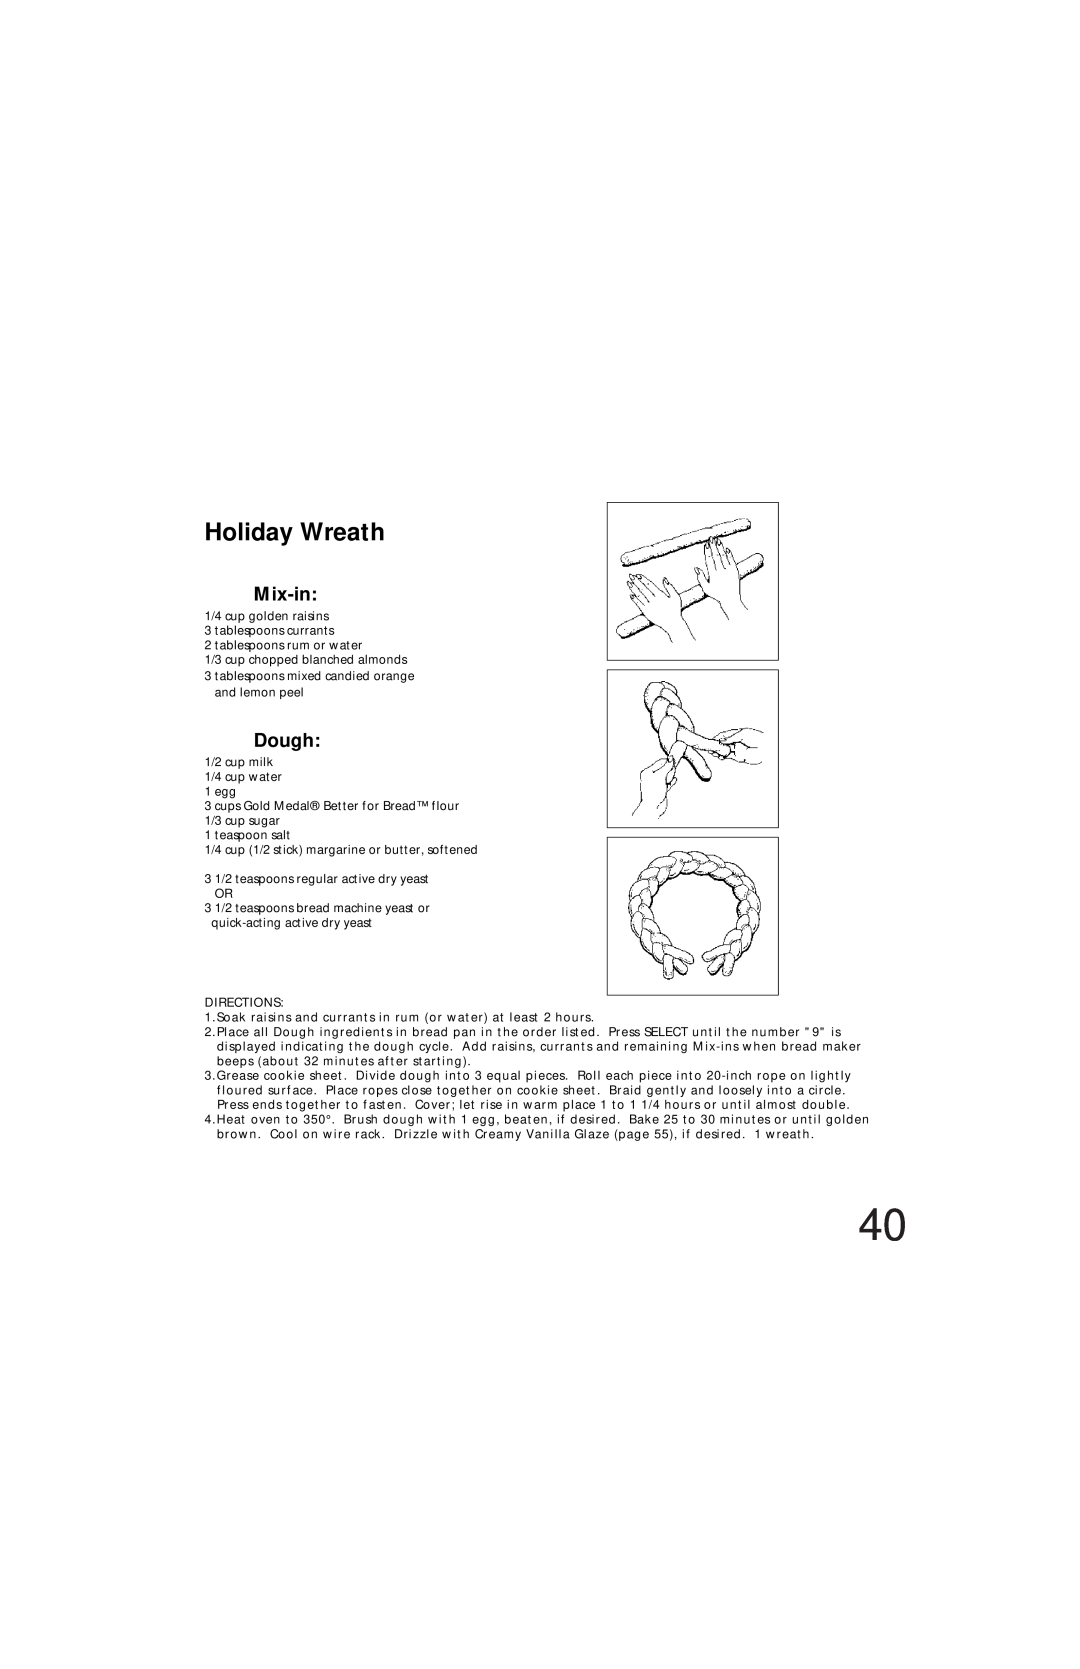 Oster Bread & Dough Maker manual Holiday Wreath, Mix-in 